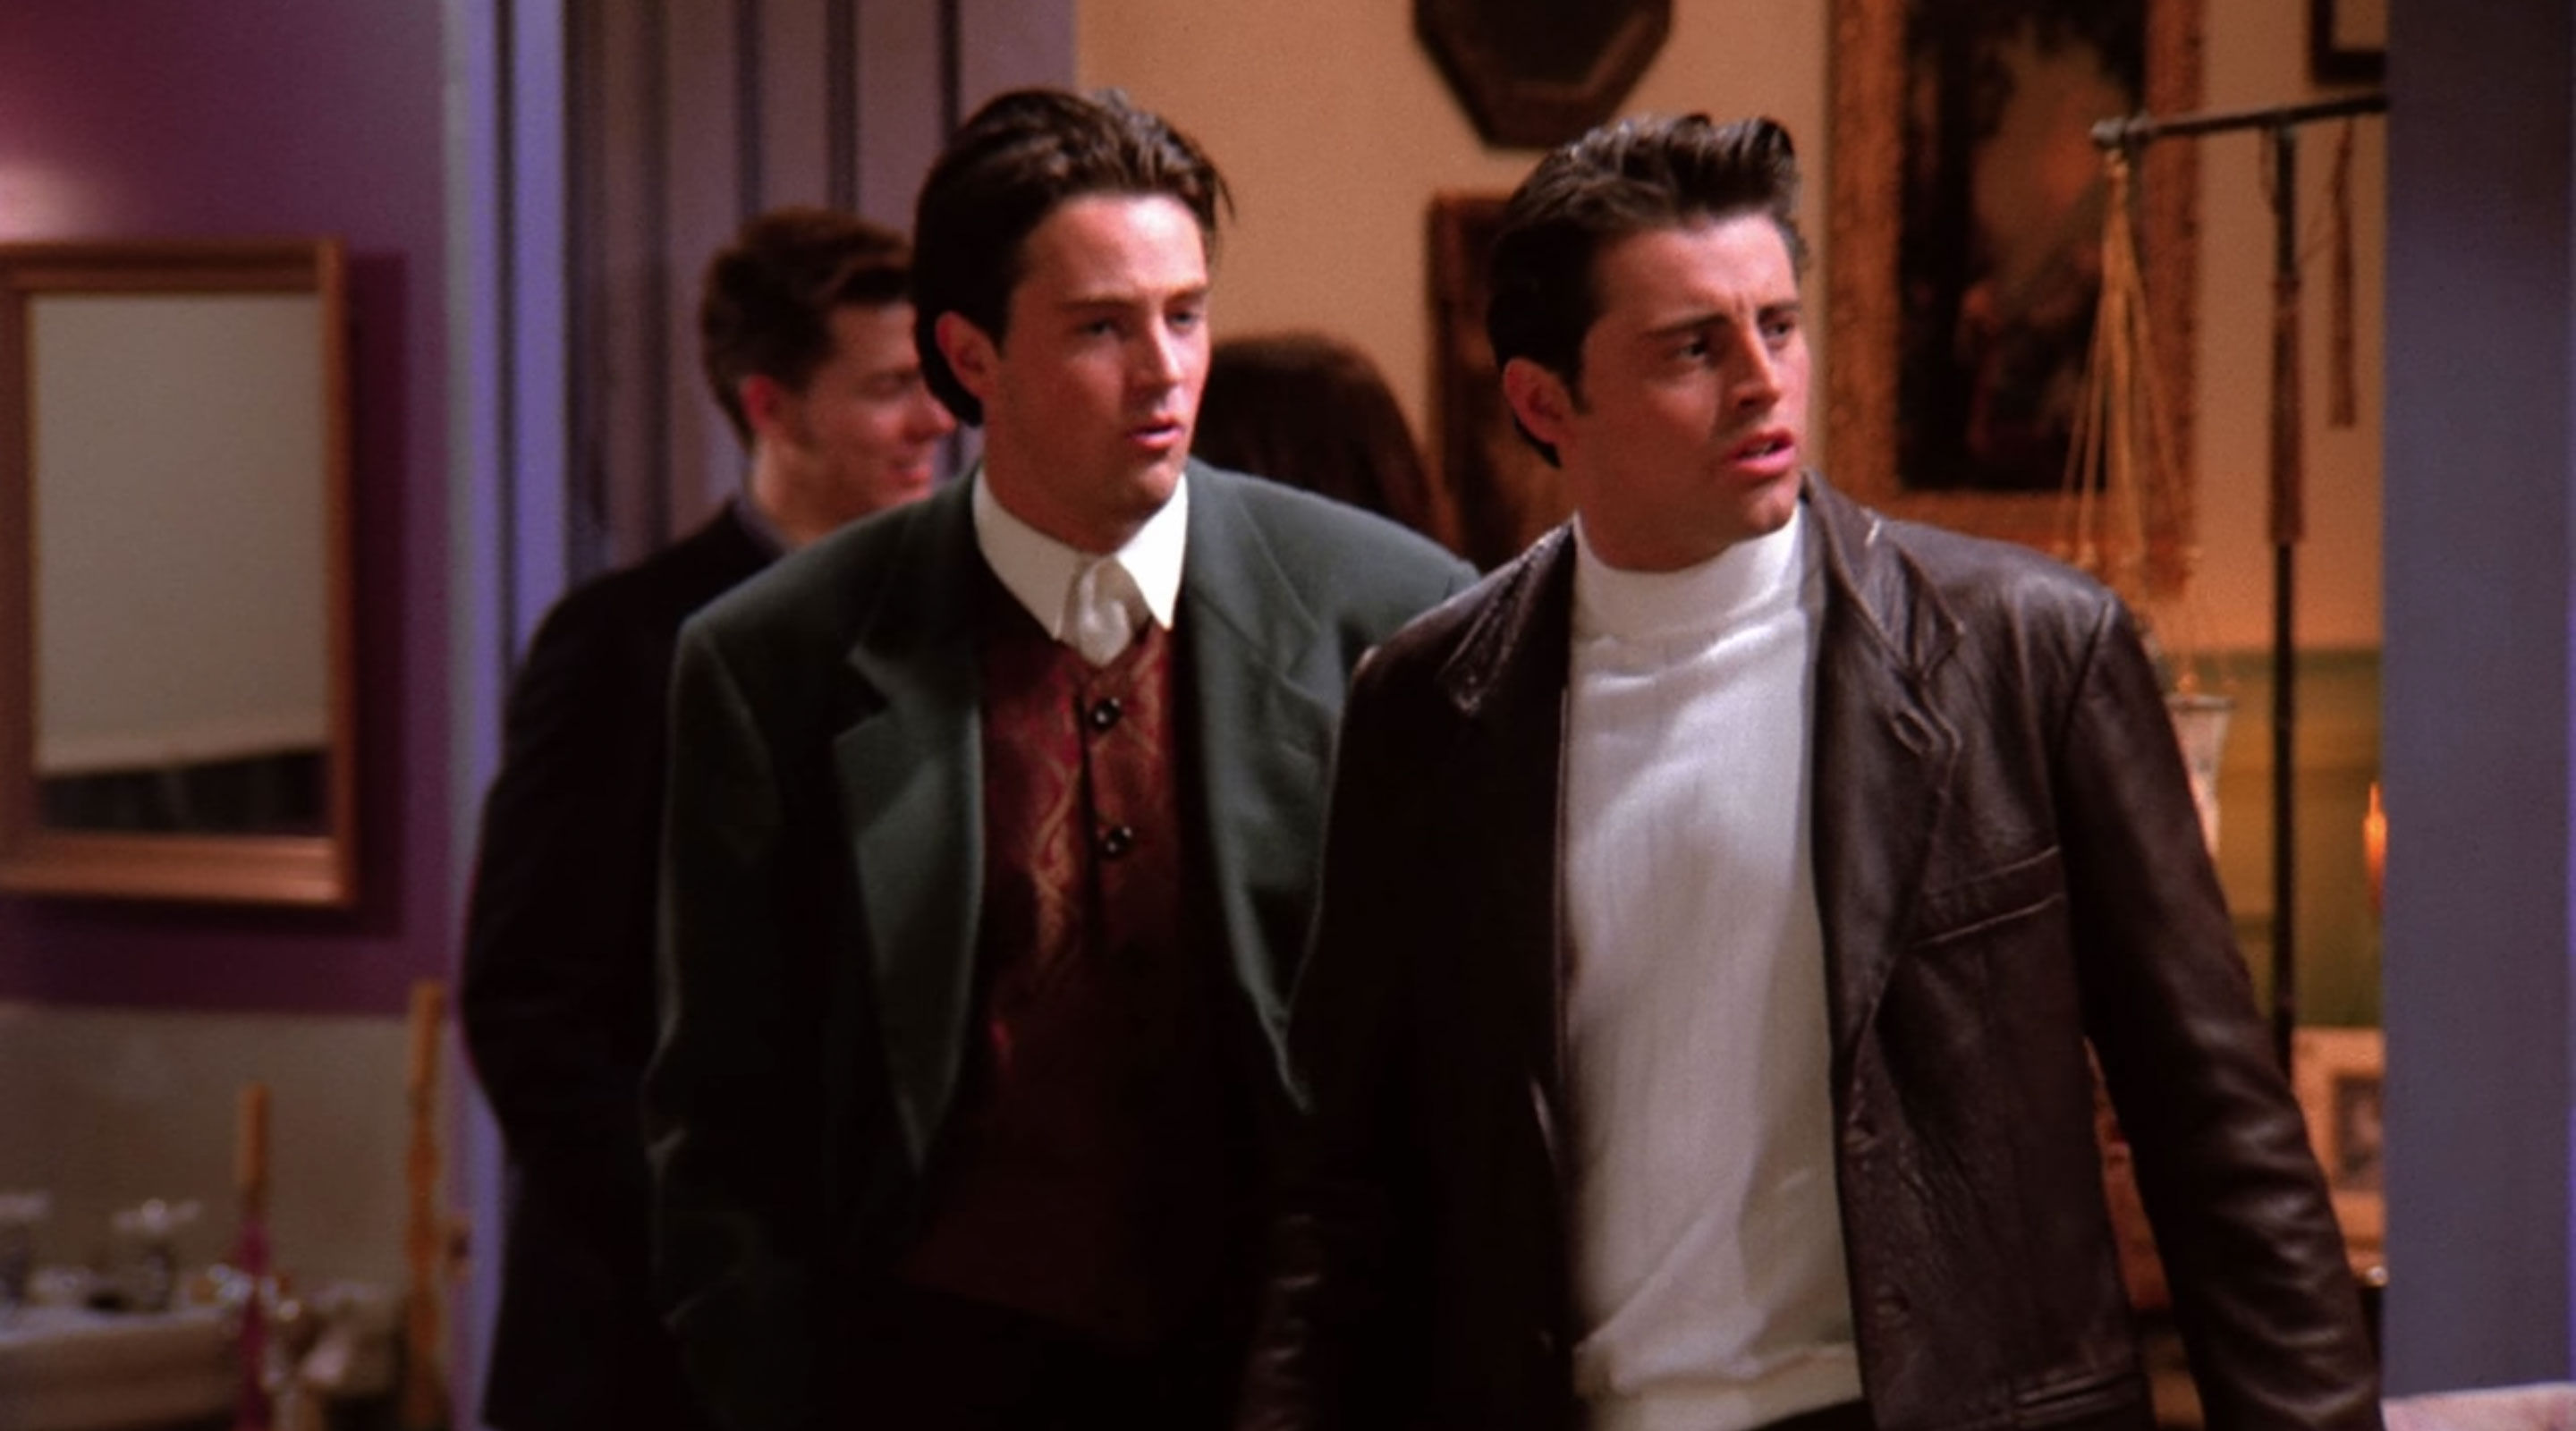 The First and Last Outfits of Every Character on Friends